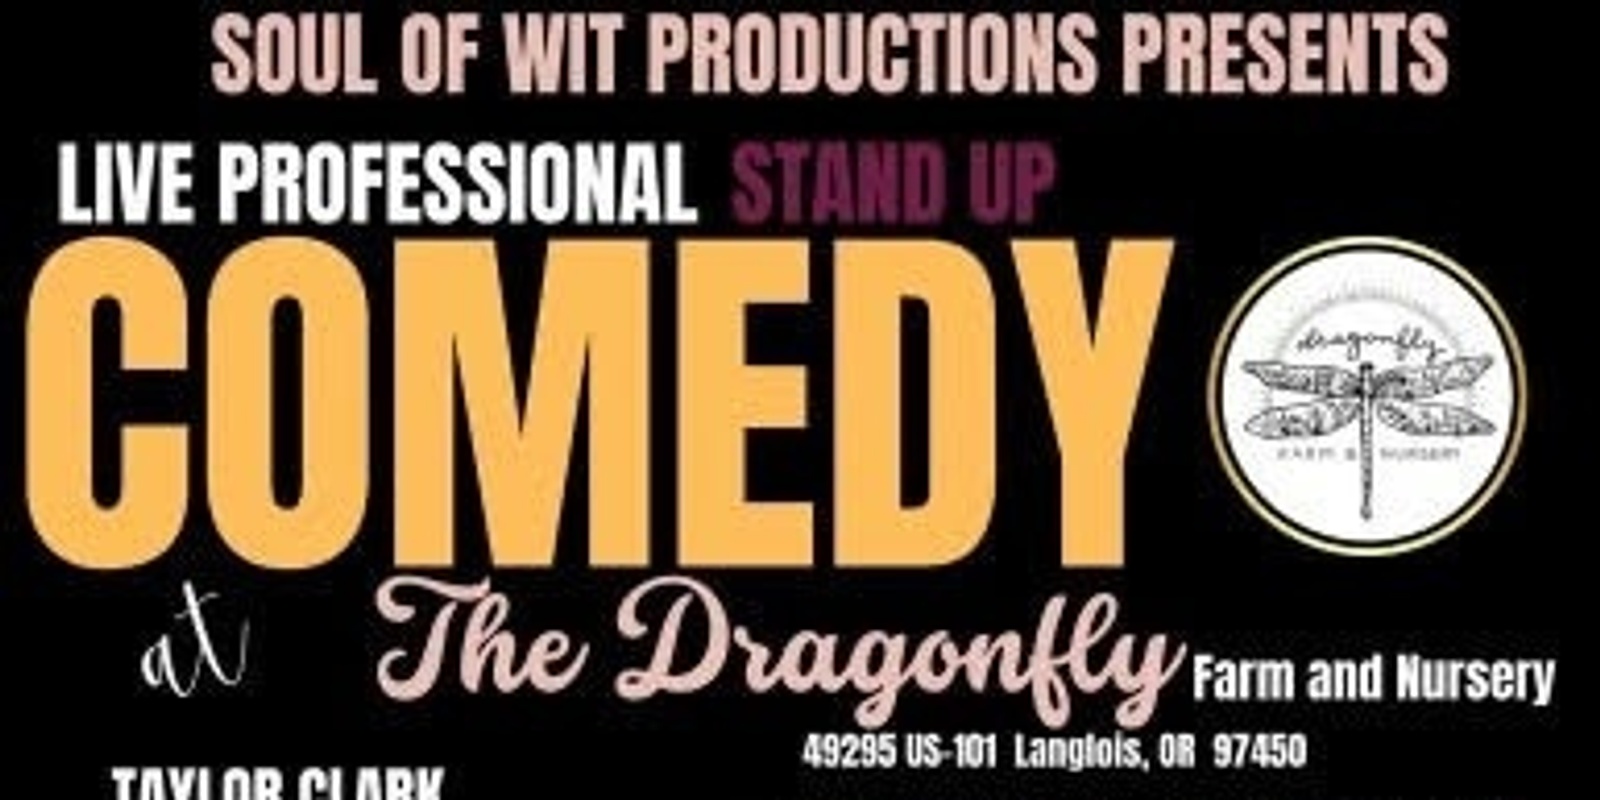 Banner image for Professional Stand Up Comedy and Live Music at Dragonfly Farm & Nursery